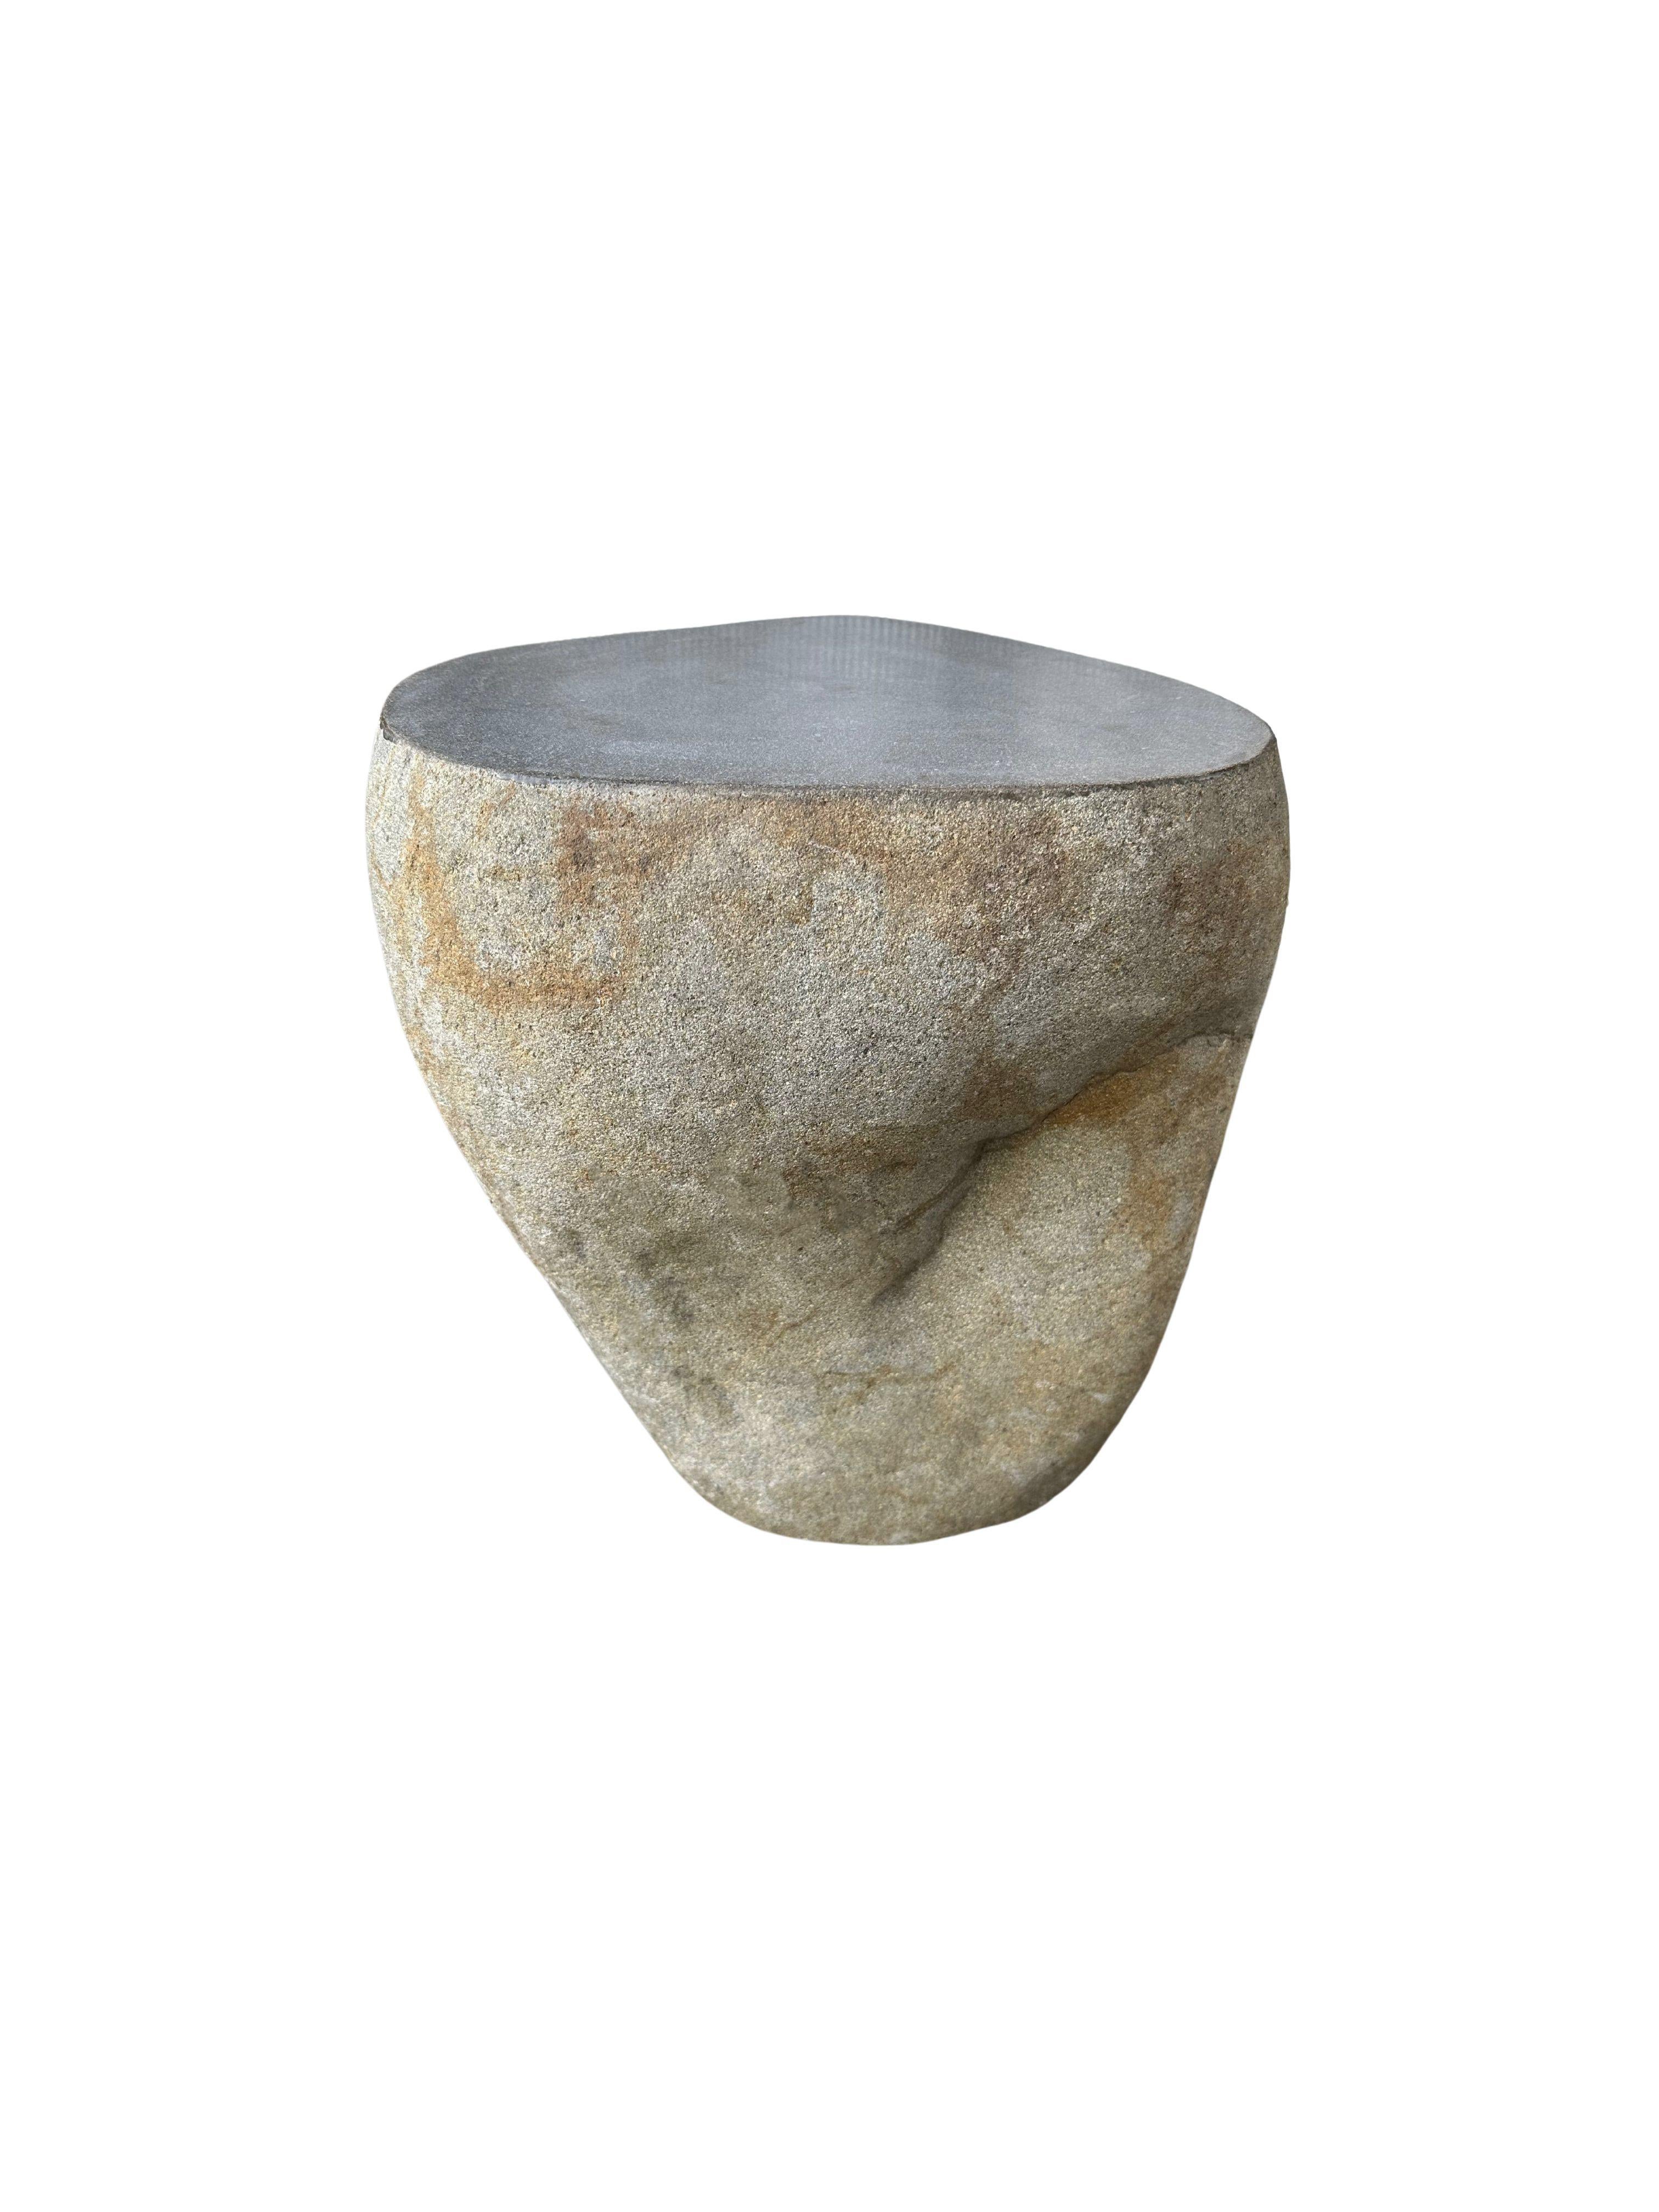 Contemporary Solid Stone Side Table / Pedestal from Java, Indonesia